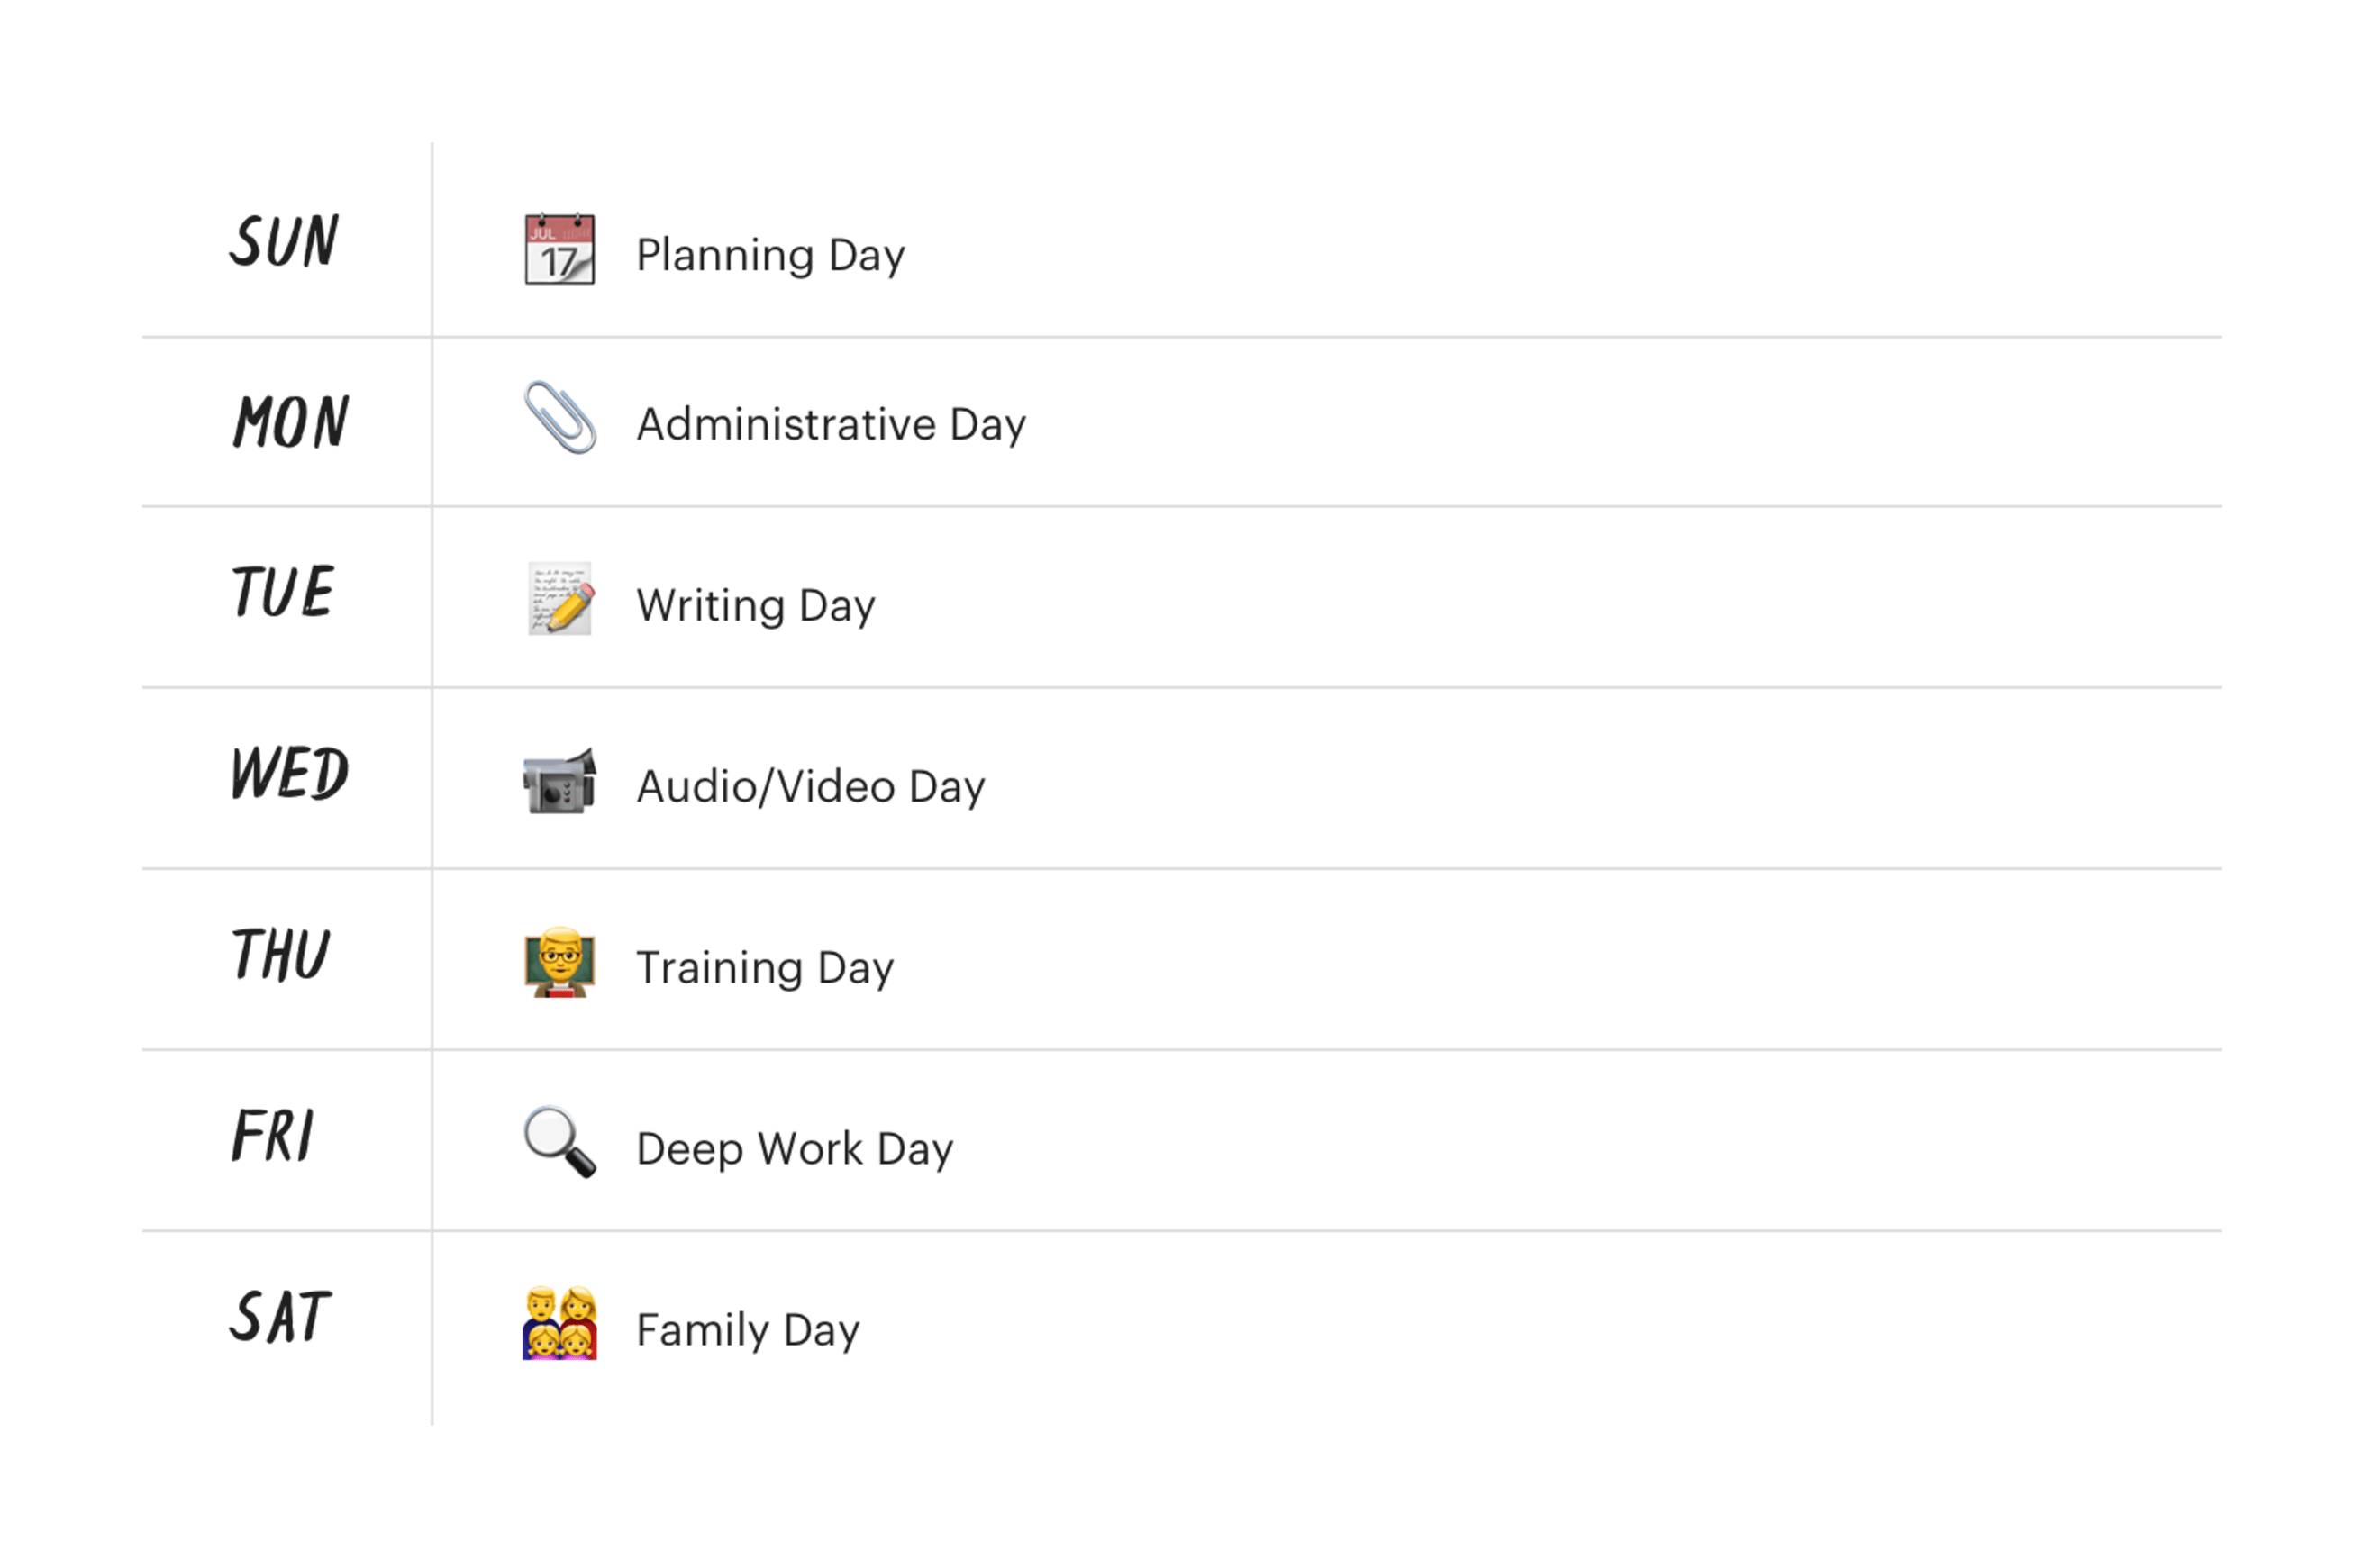 Day theming calendar with days for administrative tasks, writing, deep work, and training.